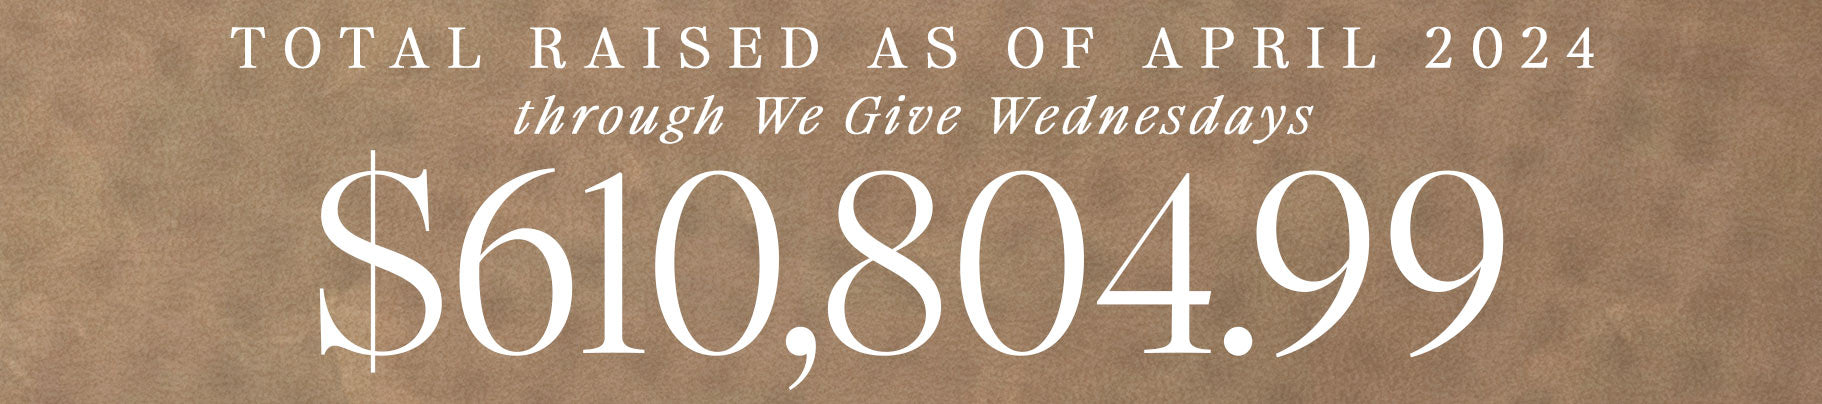 brown graphic reading: total raised as of april 2024 through we give wednesdays = $610,804.99